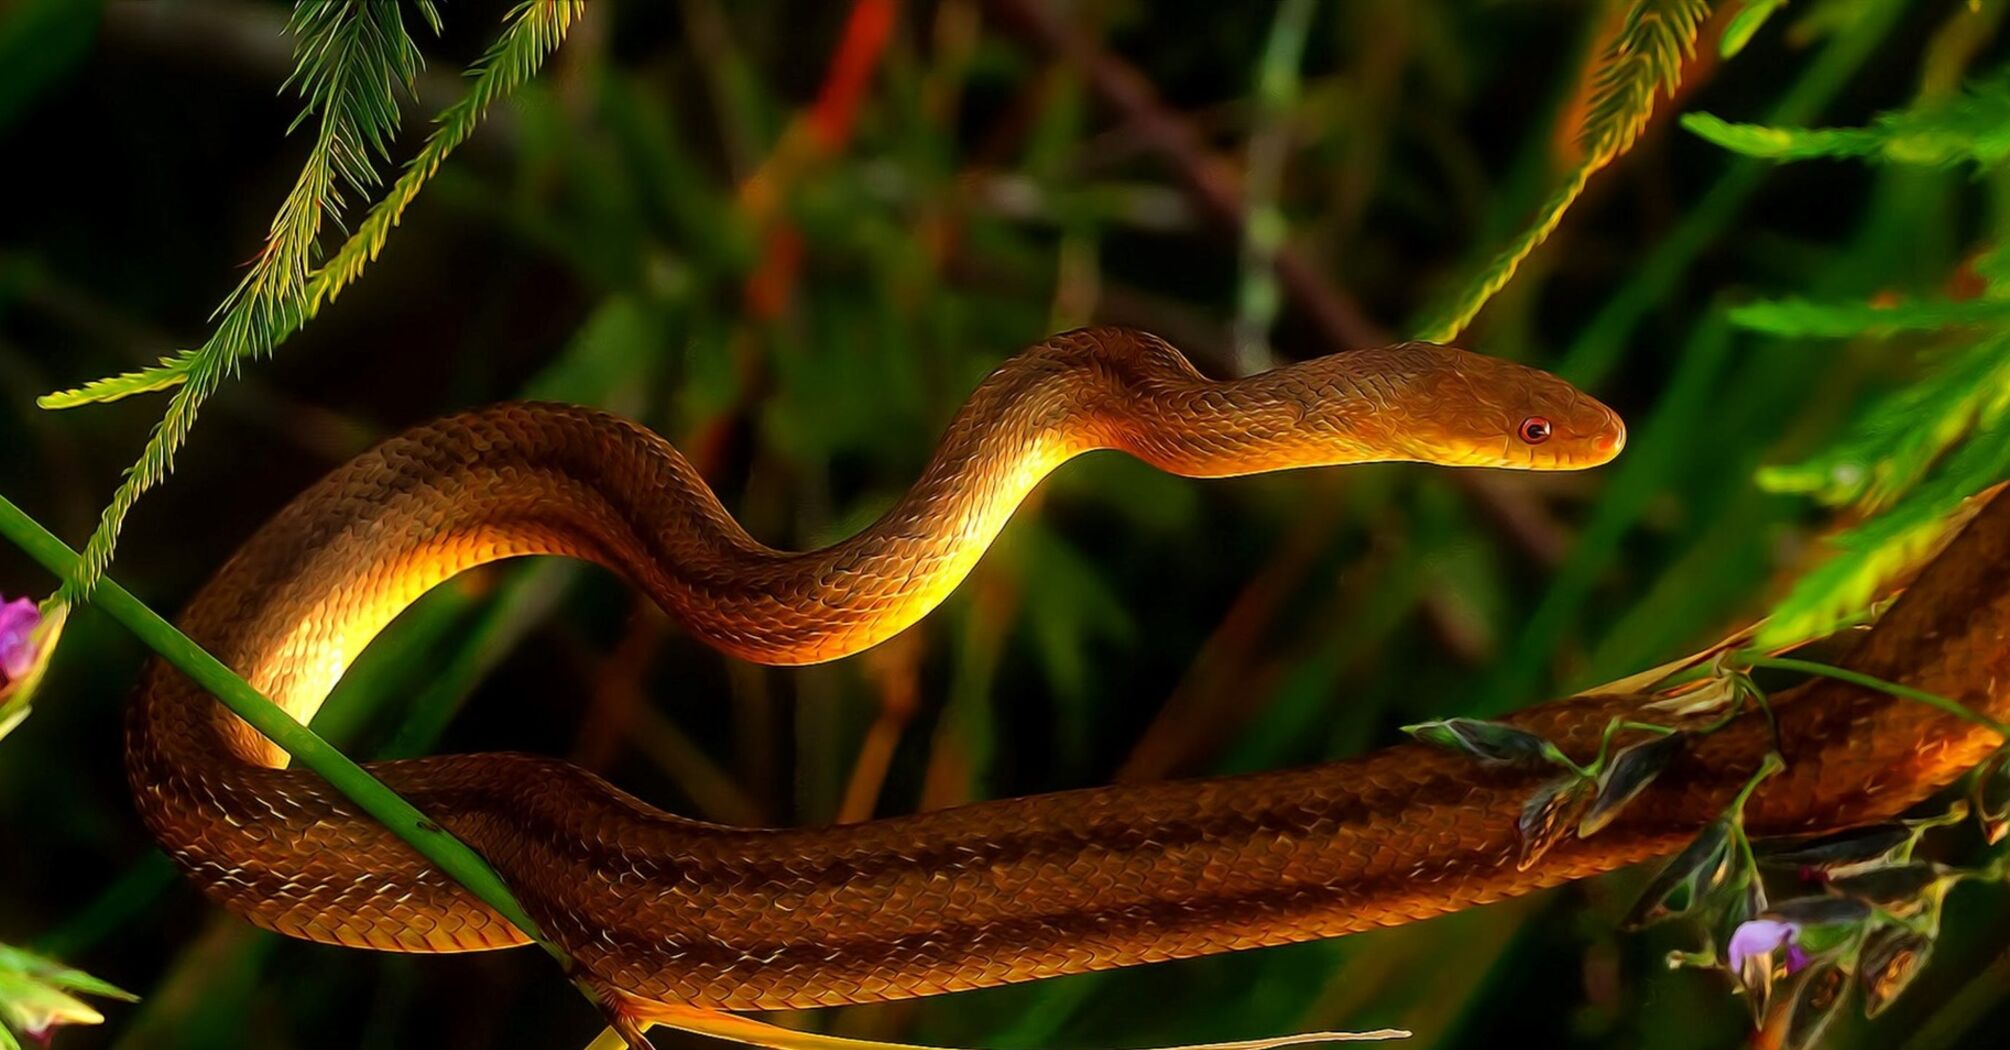 Snake venom helps: scientists have discovered an effective remedy for high blood pressure